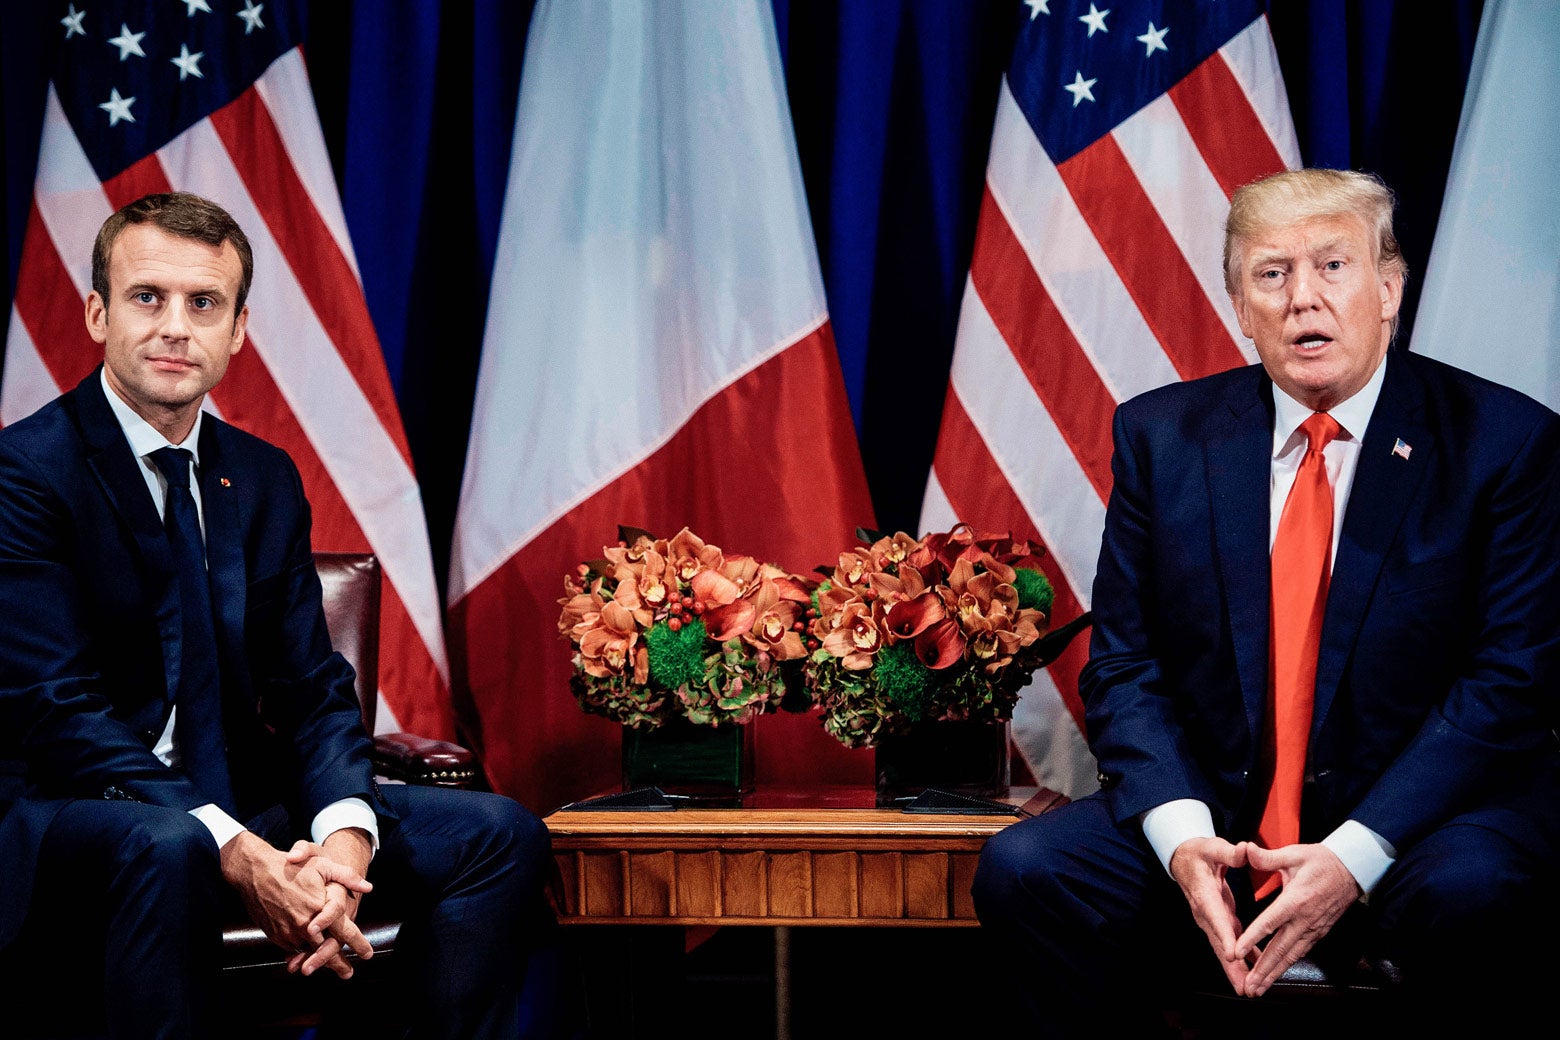 French President Emmanuel Macron listens while U.S. President Donald Trump makes a statement for the press before a meeting at the Palace Hotel during the 72nd session of the United Nations General Assembly on Sept. 18 in New York.